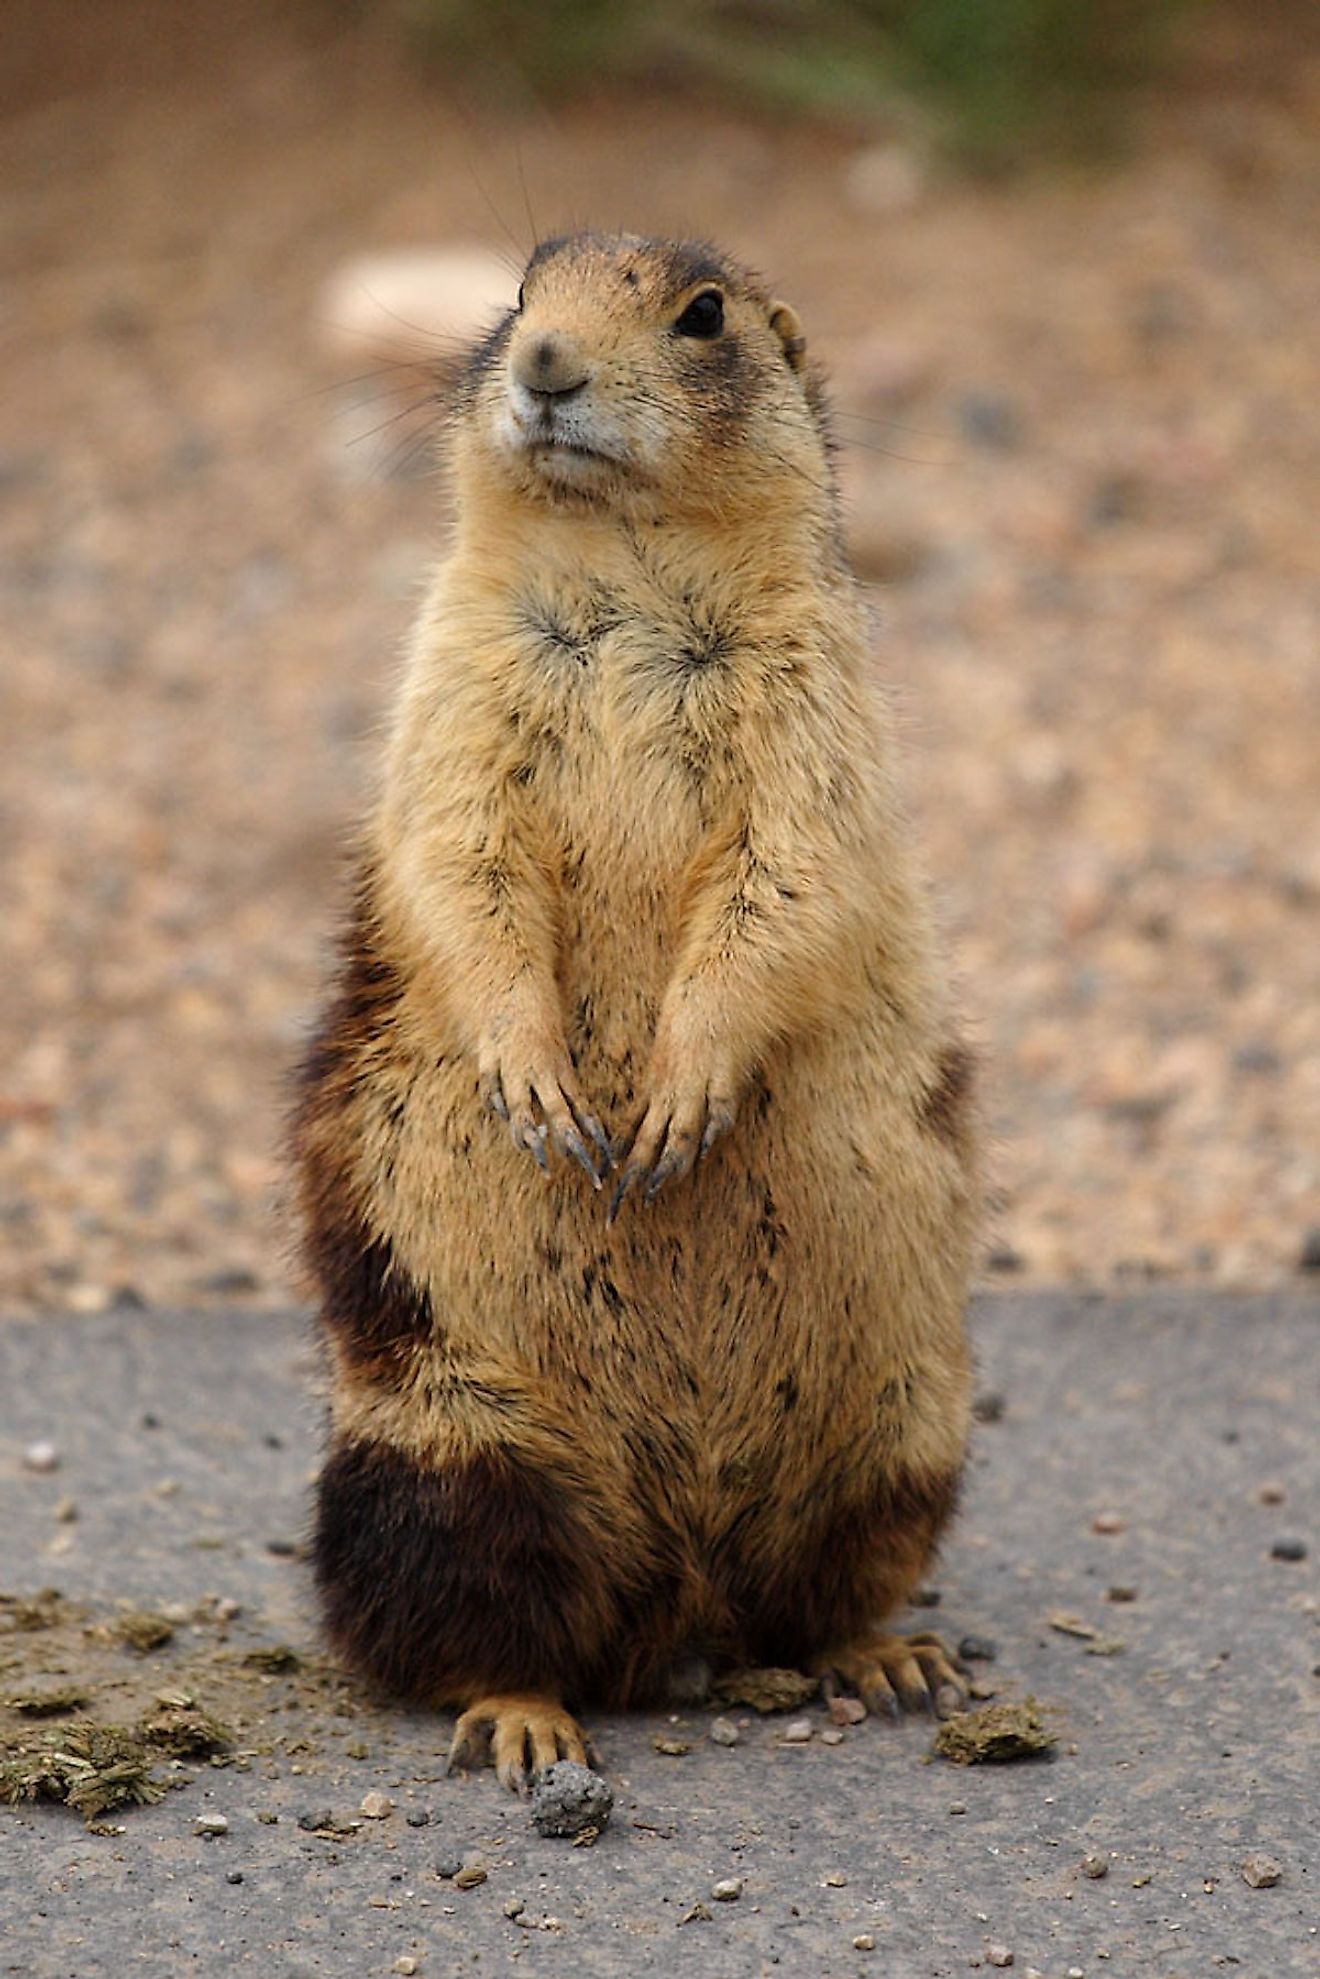 The Utah prairie dog is an endangered species found in the US. Image credit: James Phelps/Wikimedia.org